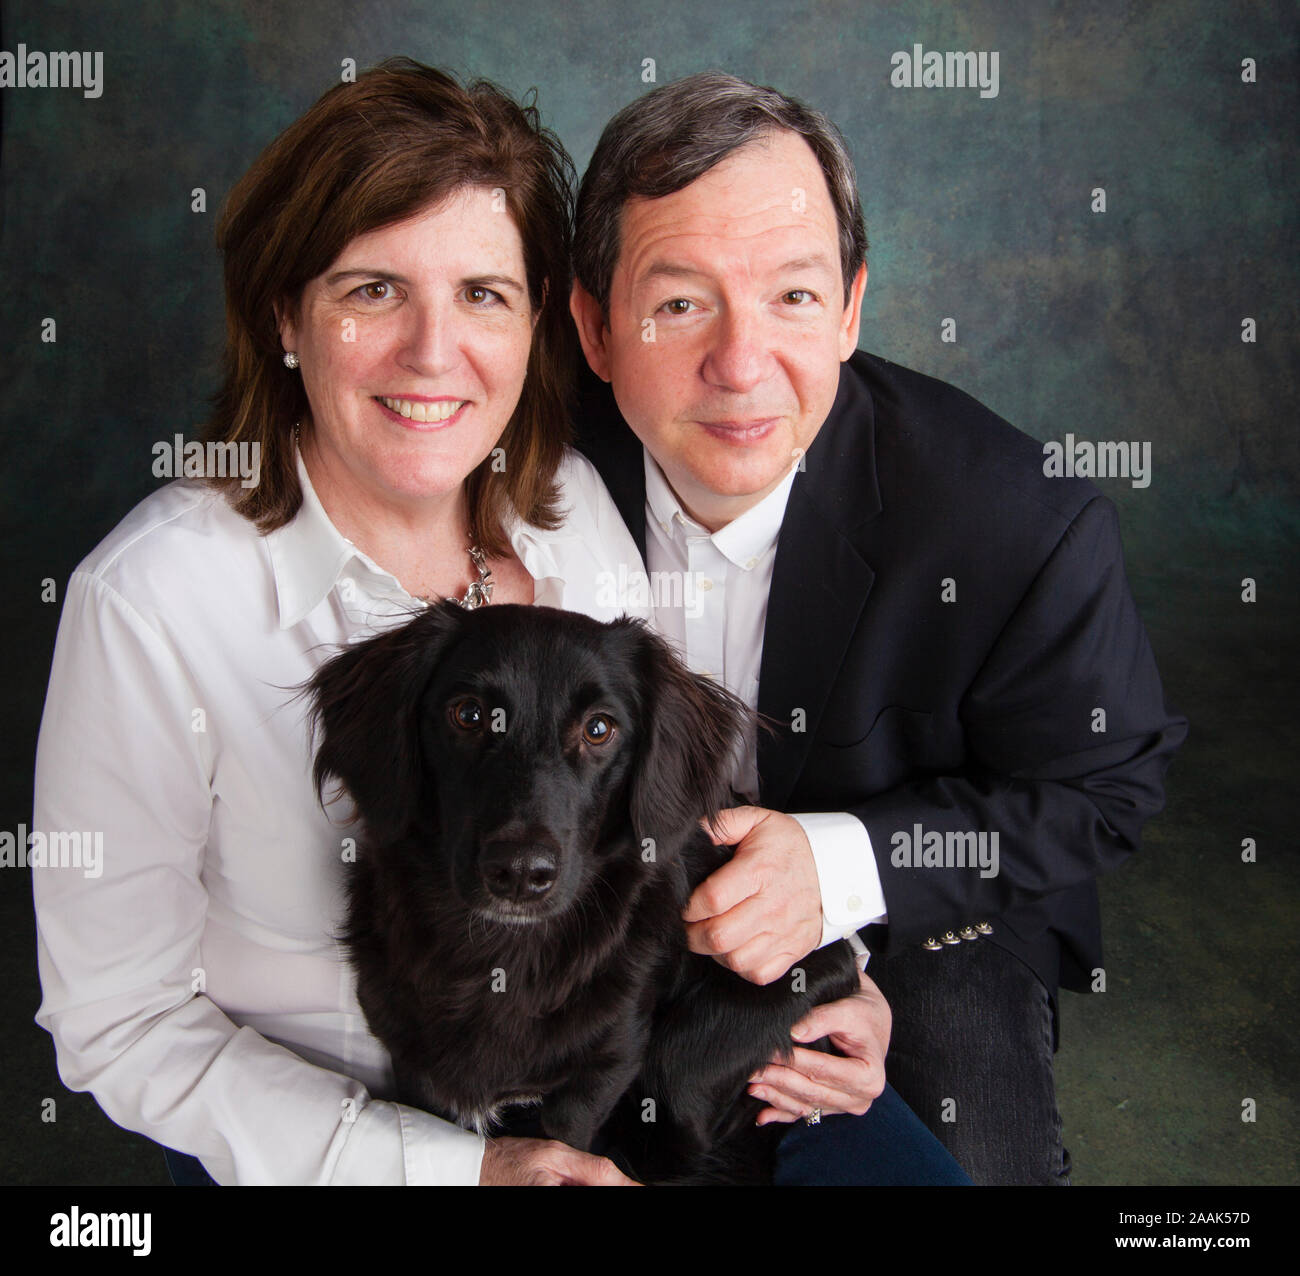 Studio portrait of mature couple with mixed breed dog Stock Photo